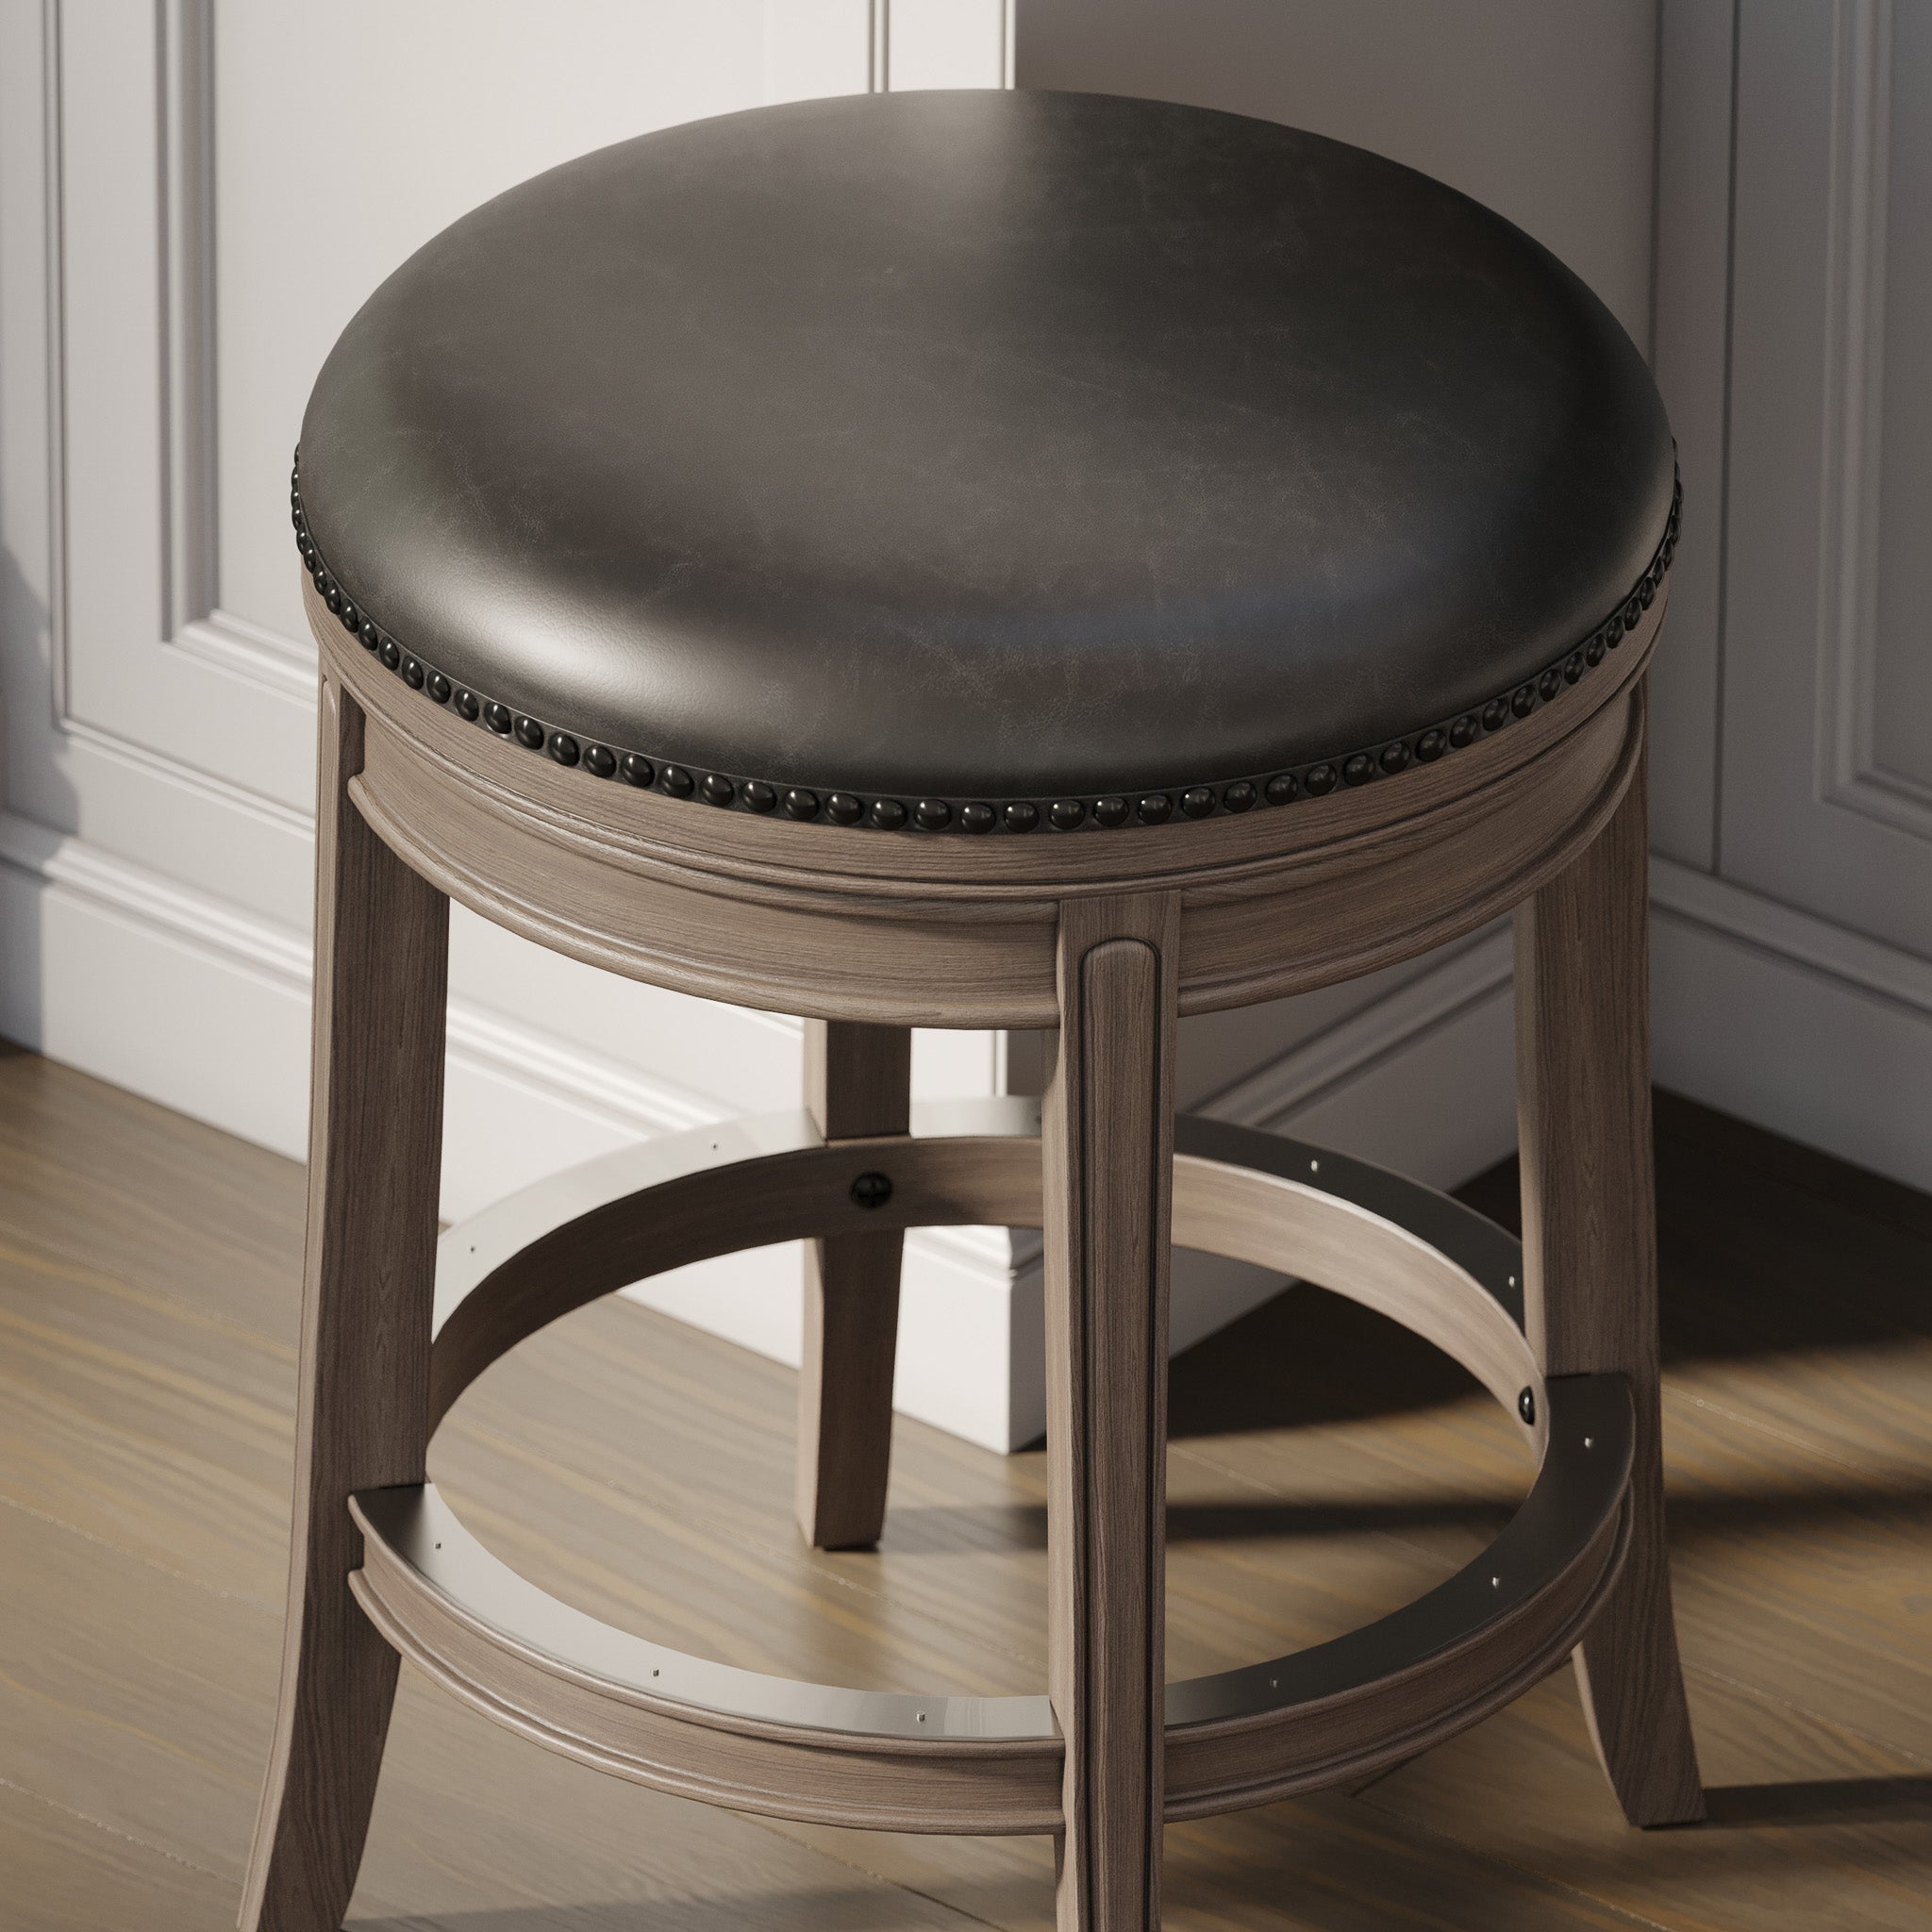 Alexander Backless Counter Stool in Reclaimed Oak Finish with Ronan Stone Vegan Leather in Stools by Maven Lane